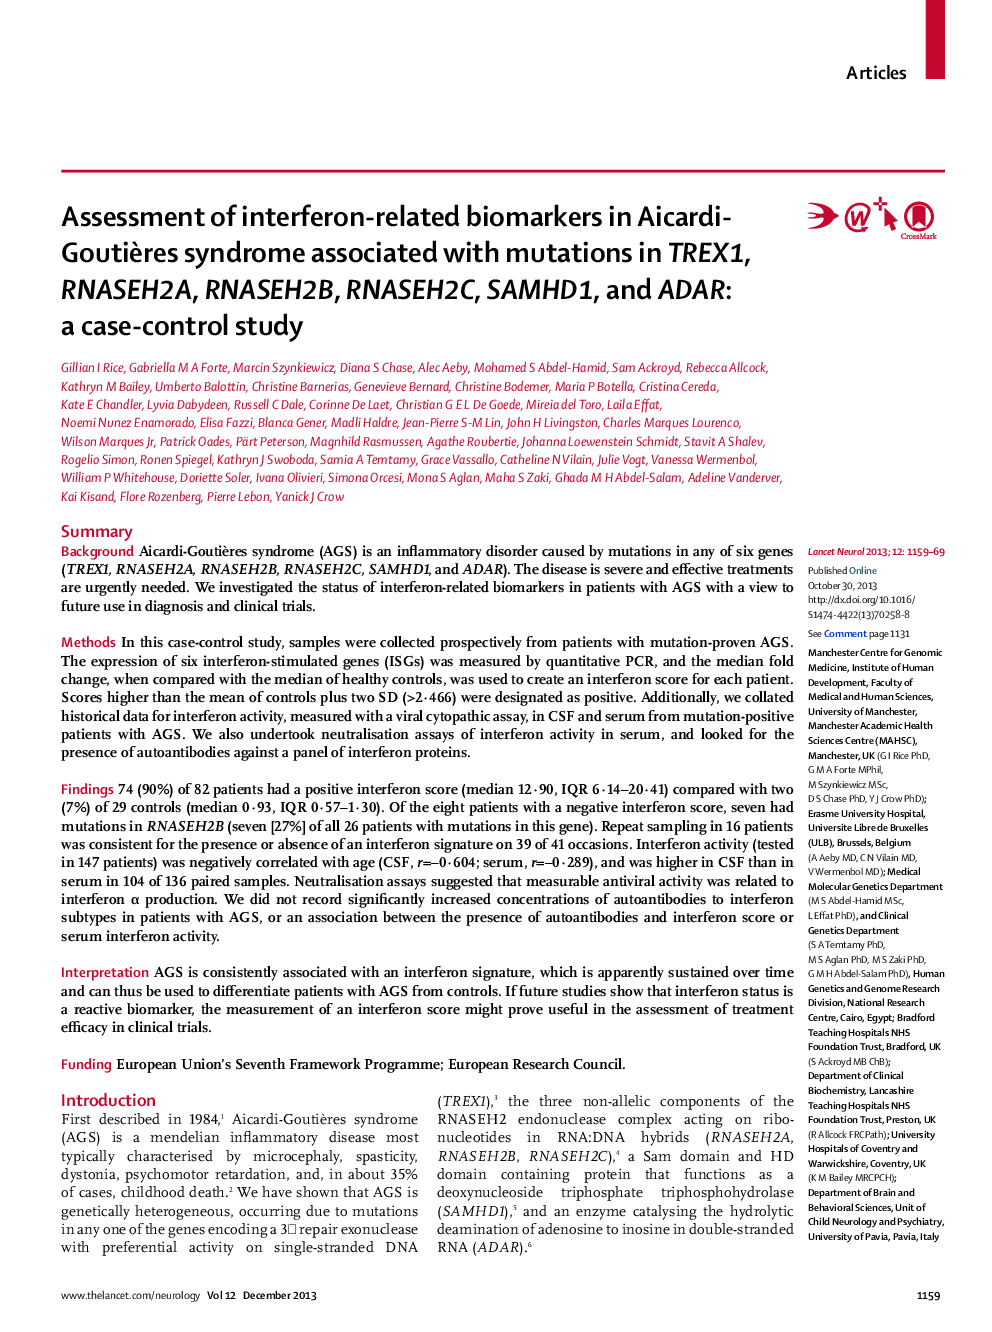 Assessment of interferon-related biomarkers in Aicardi-Goutières syndrome associated with mutations in TREX1, RNASEH2A, RNASEH2B, RNASEH2C, SAMHD1, and ADAR: a case-control study